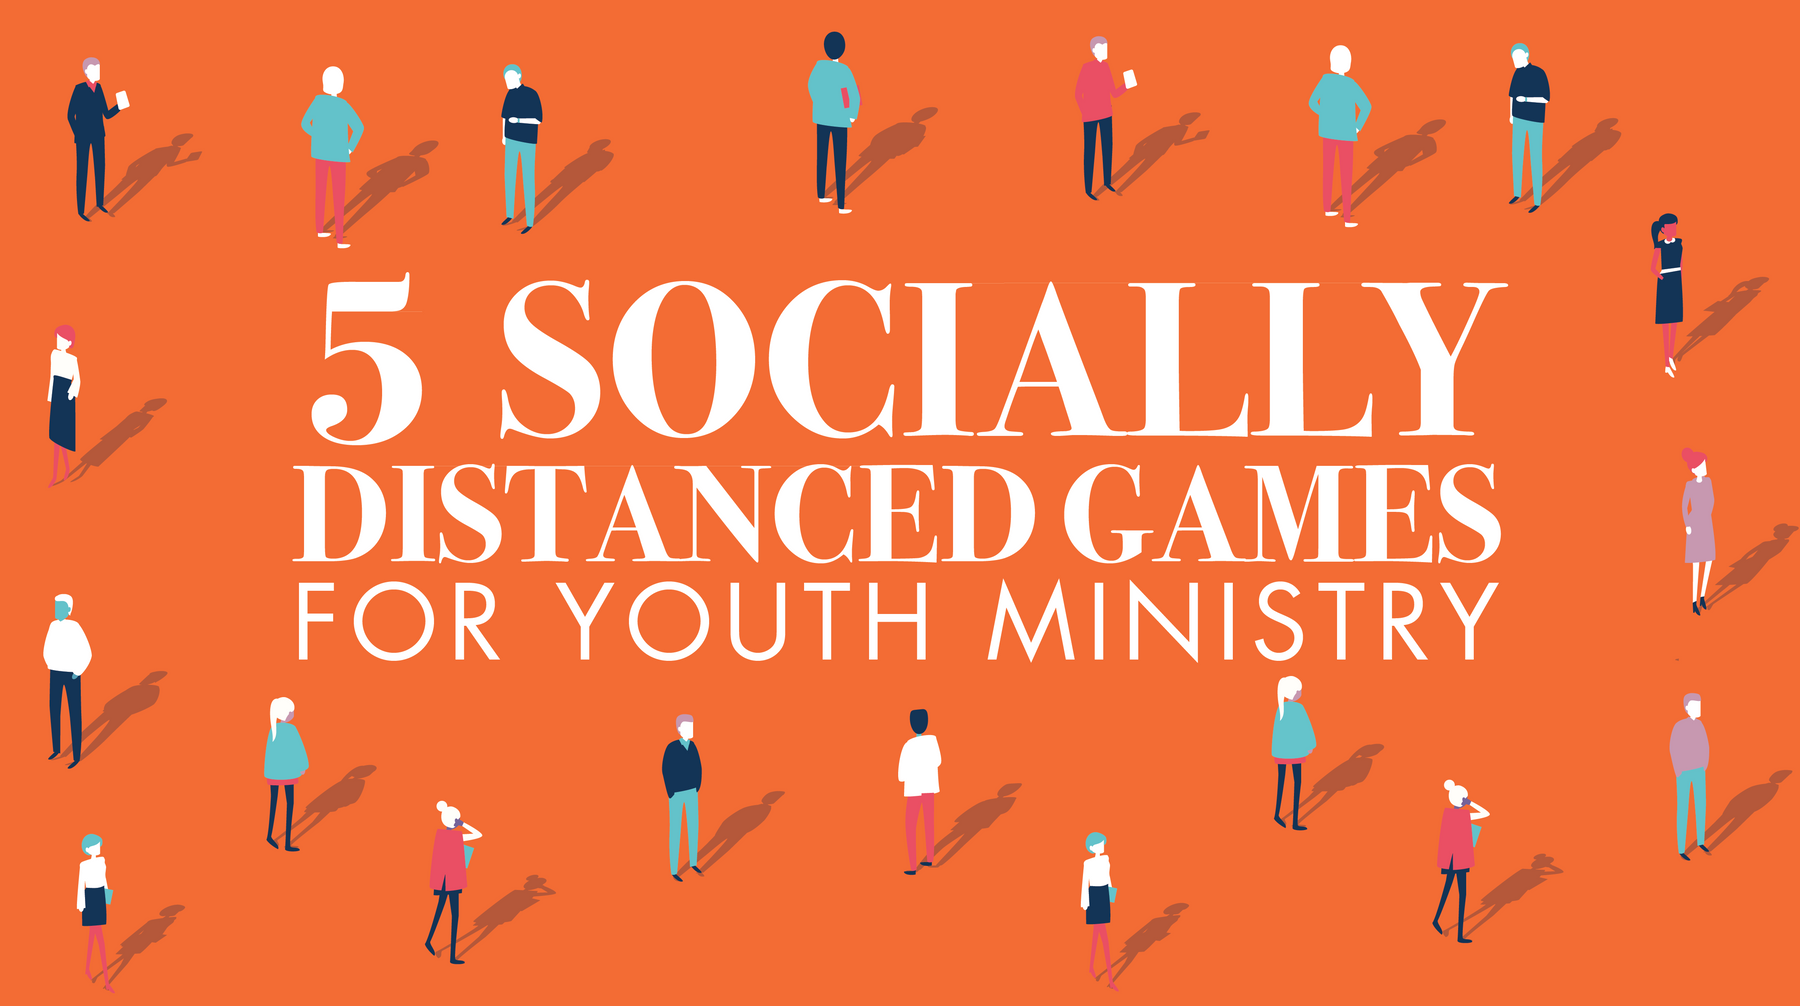 5 Socially Distanced Games for Youth Ministry